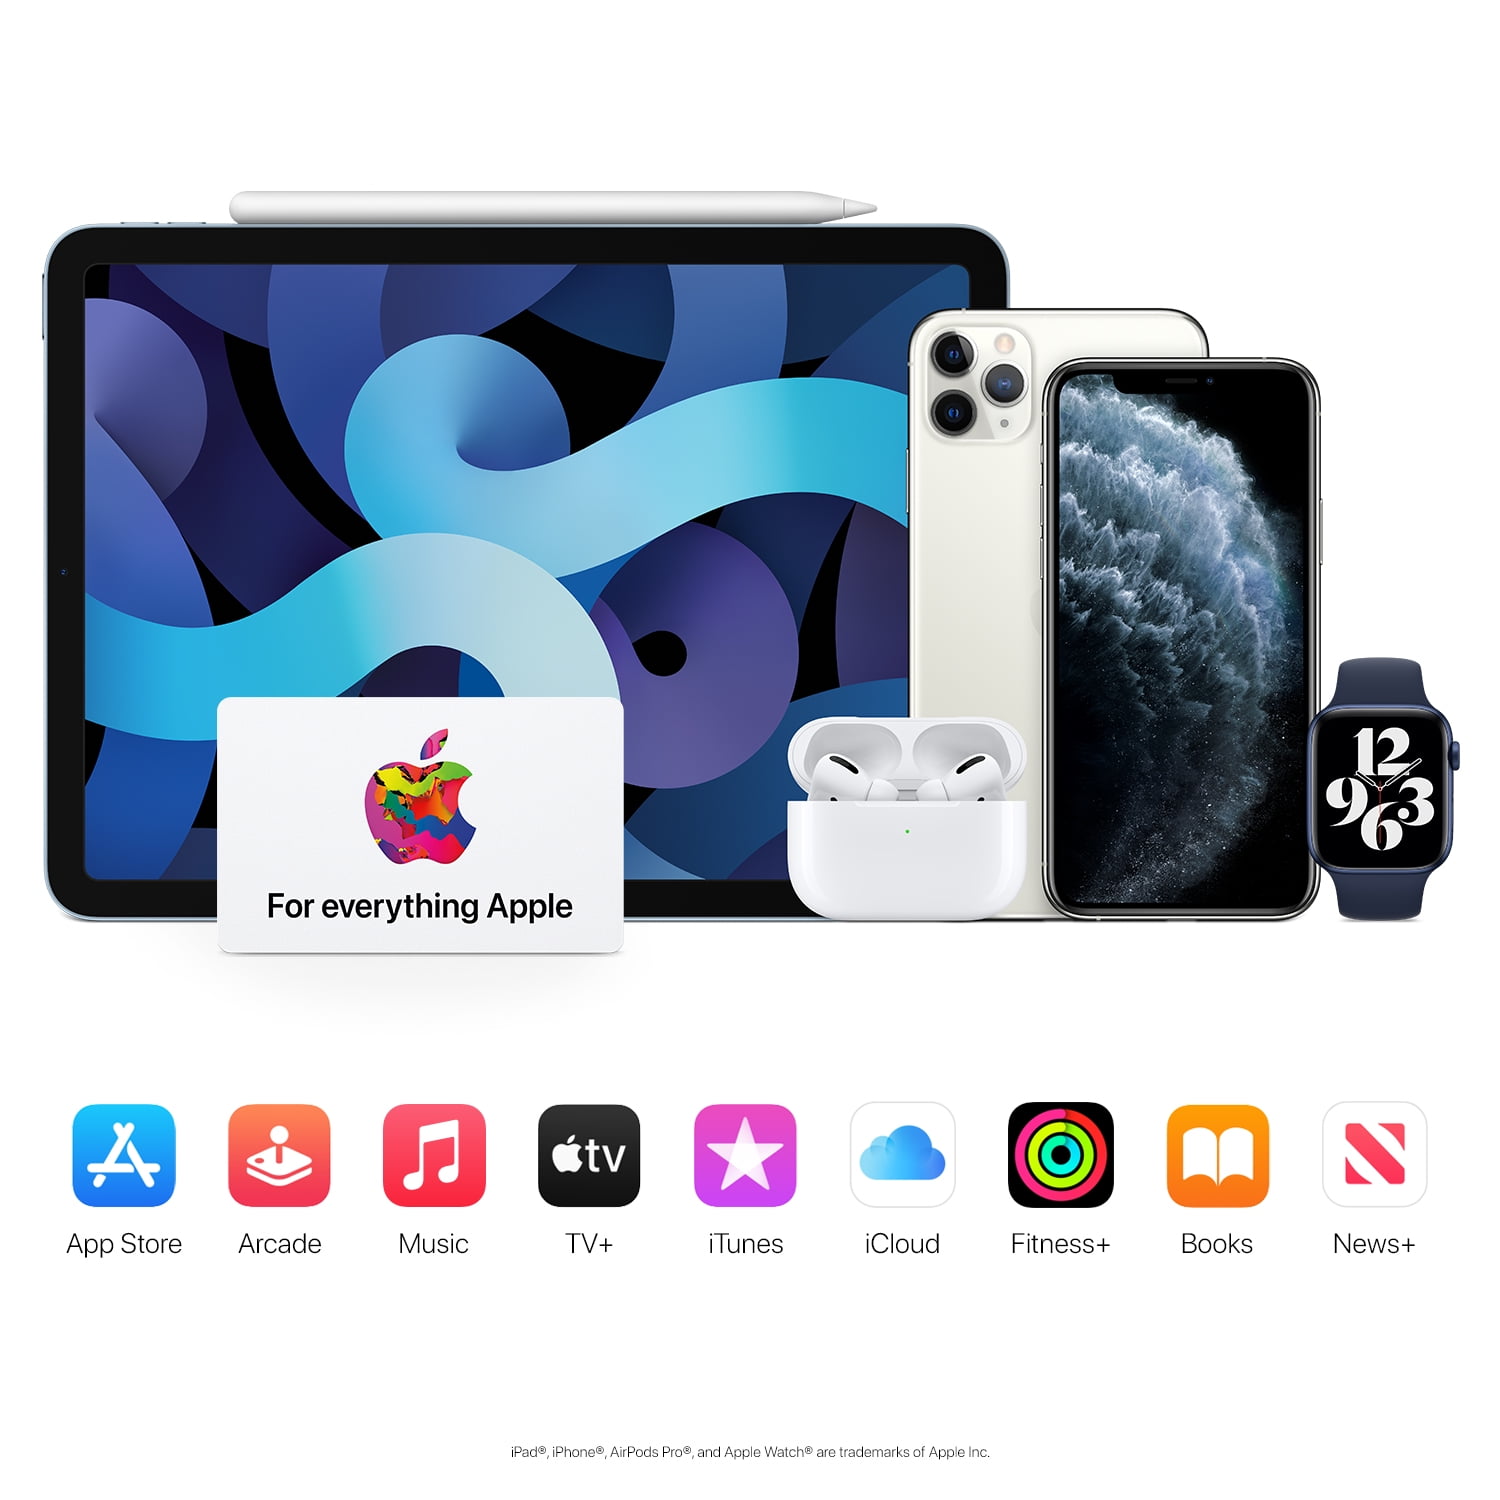 Apple Gift Card - App Store, iTunes, iPhone, iPad, AirPods, MacBook,  accessories and more